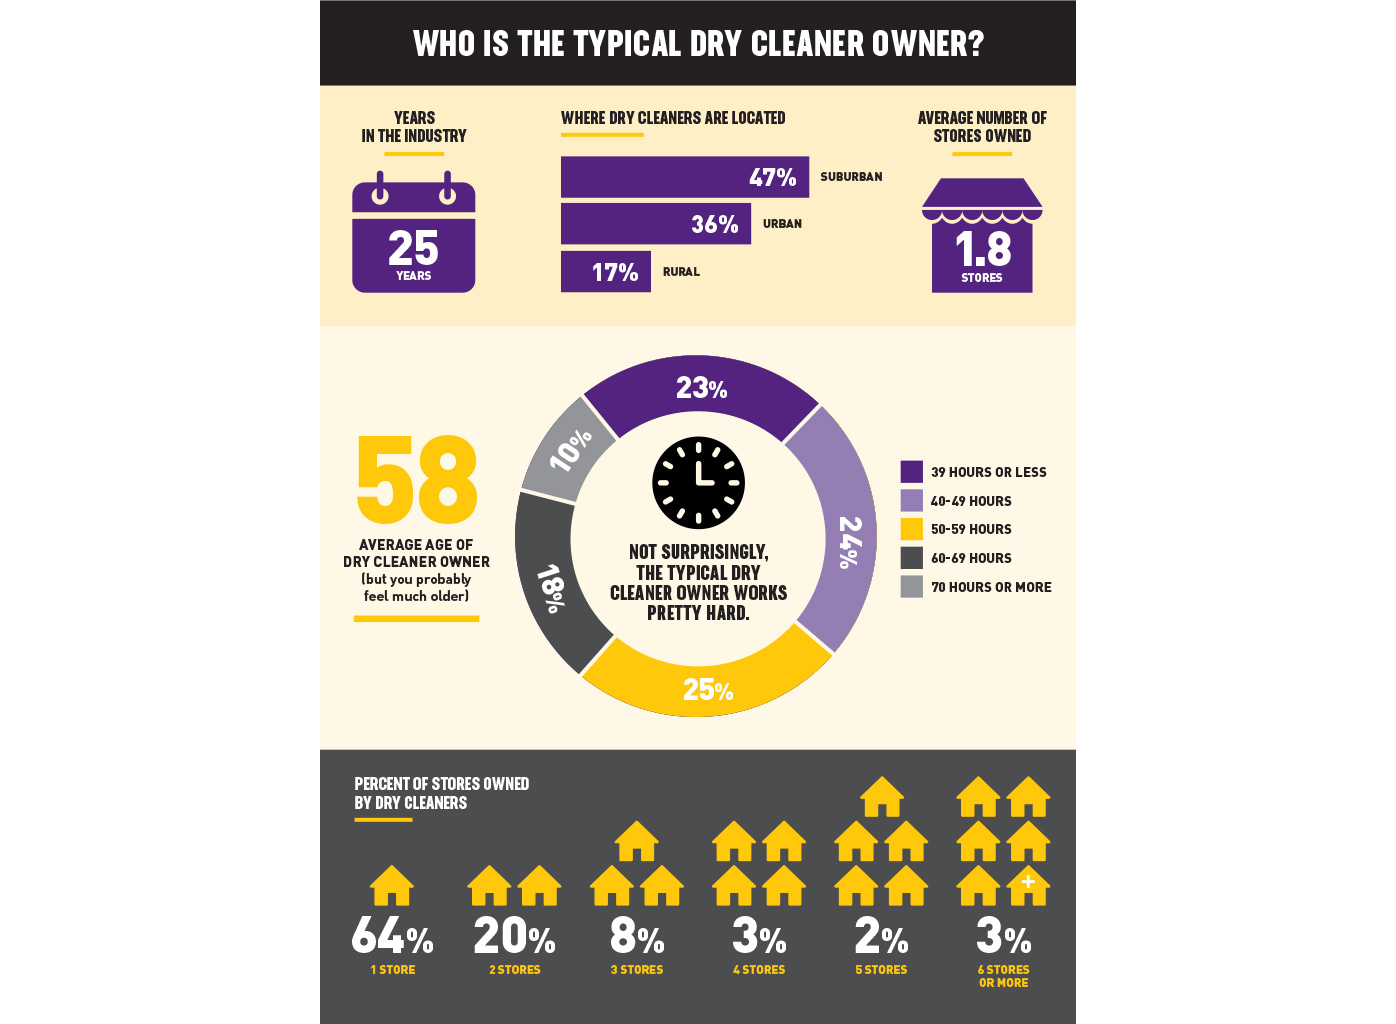 Who Is The Typical Dry Cleaner Owner?